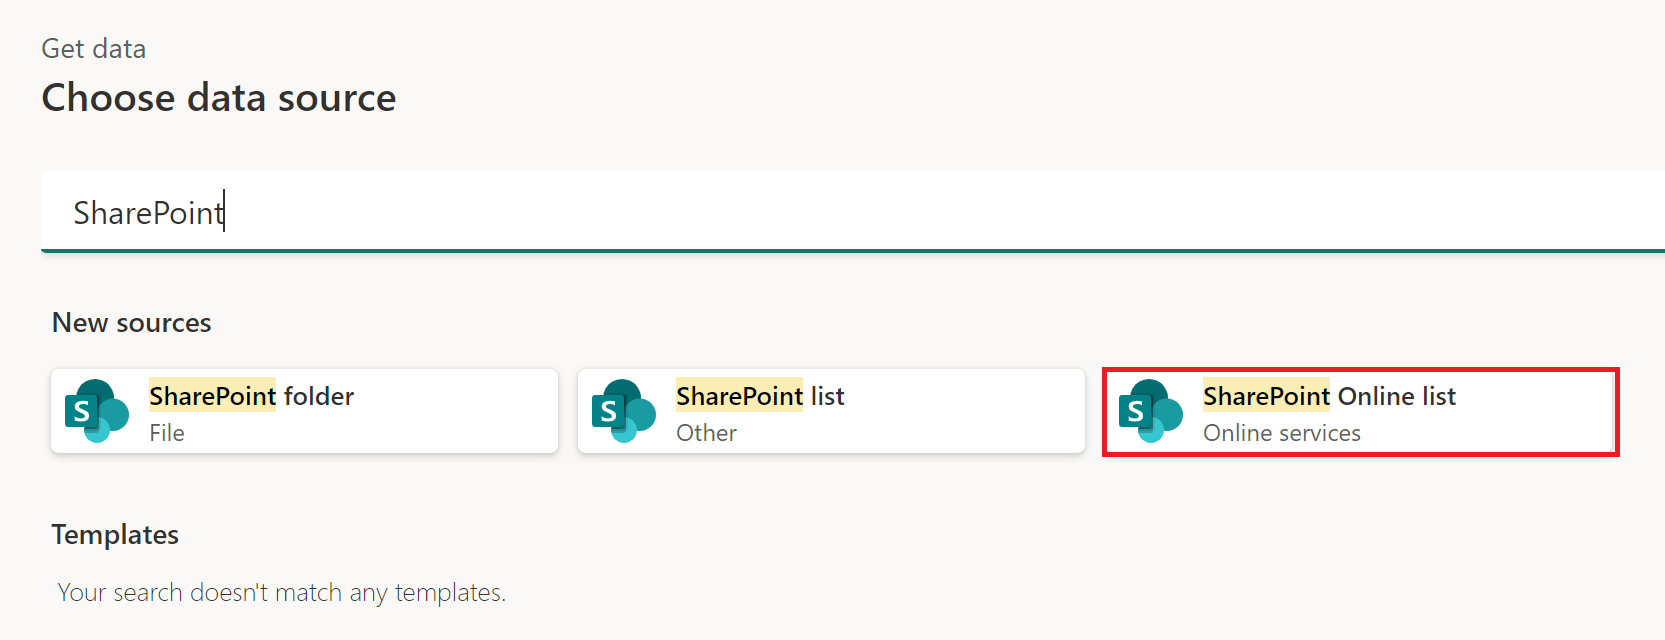 Screenshot of the get data window with SharePoint Online list emphasized.